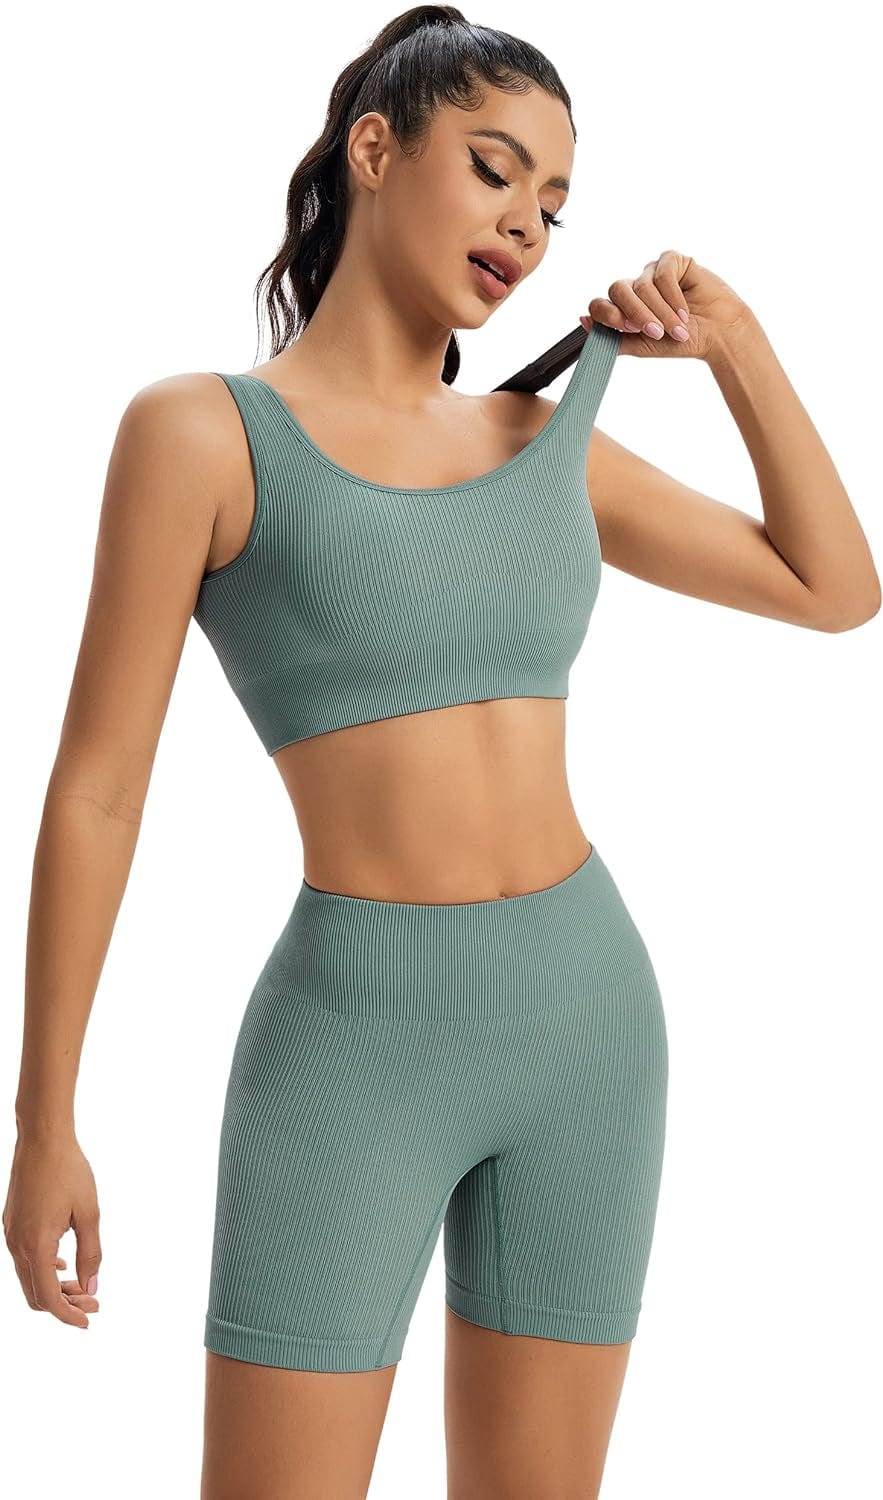 Ribbed Workout Sets for Women 2 Piece Square Neck Crop Top and High Waist Biker Shorts Seamless Activewear Tracksuit